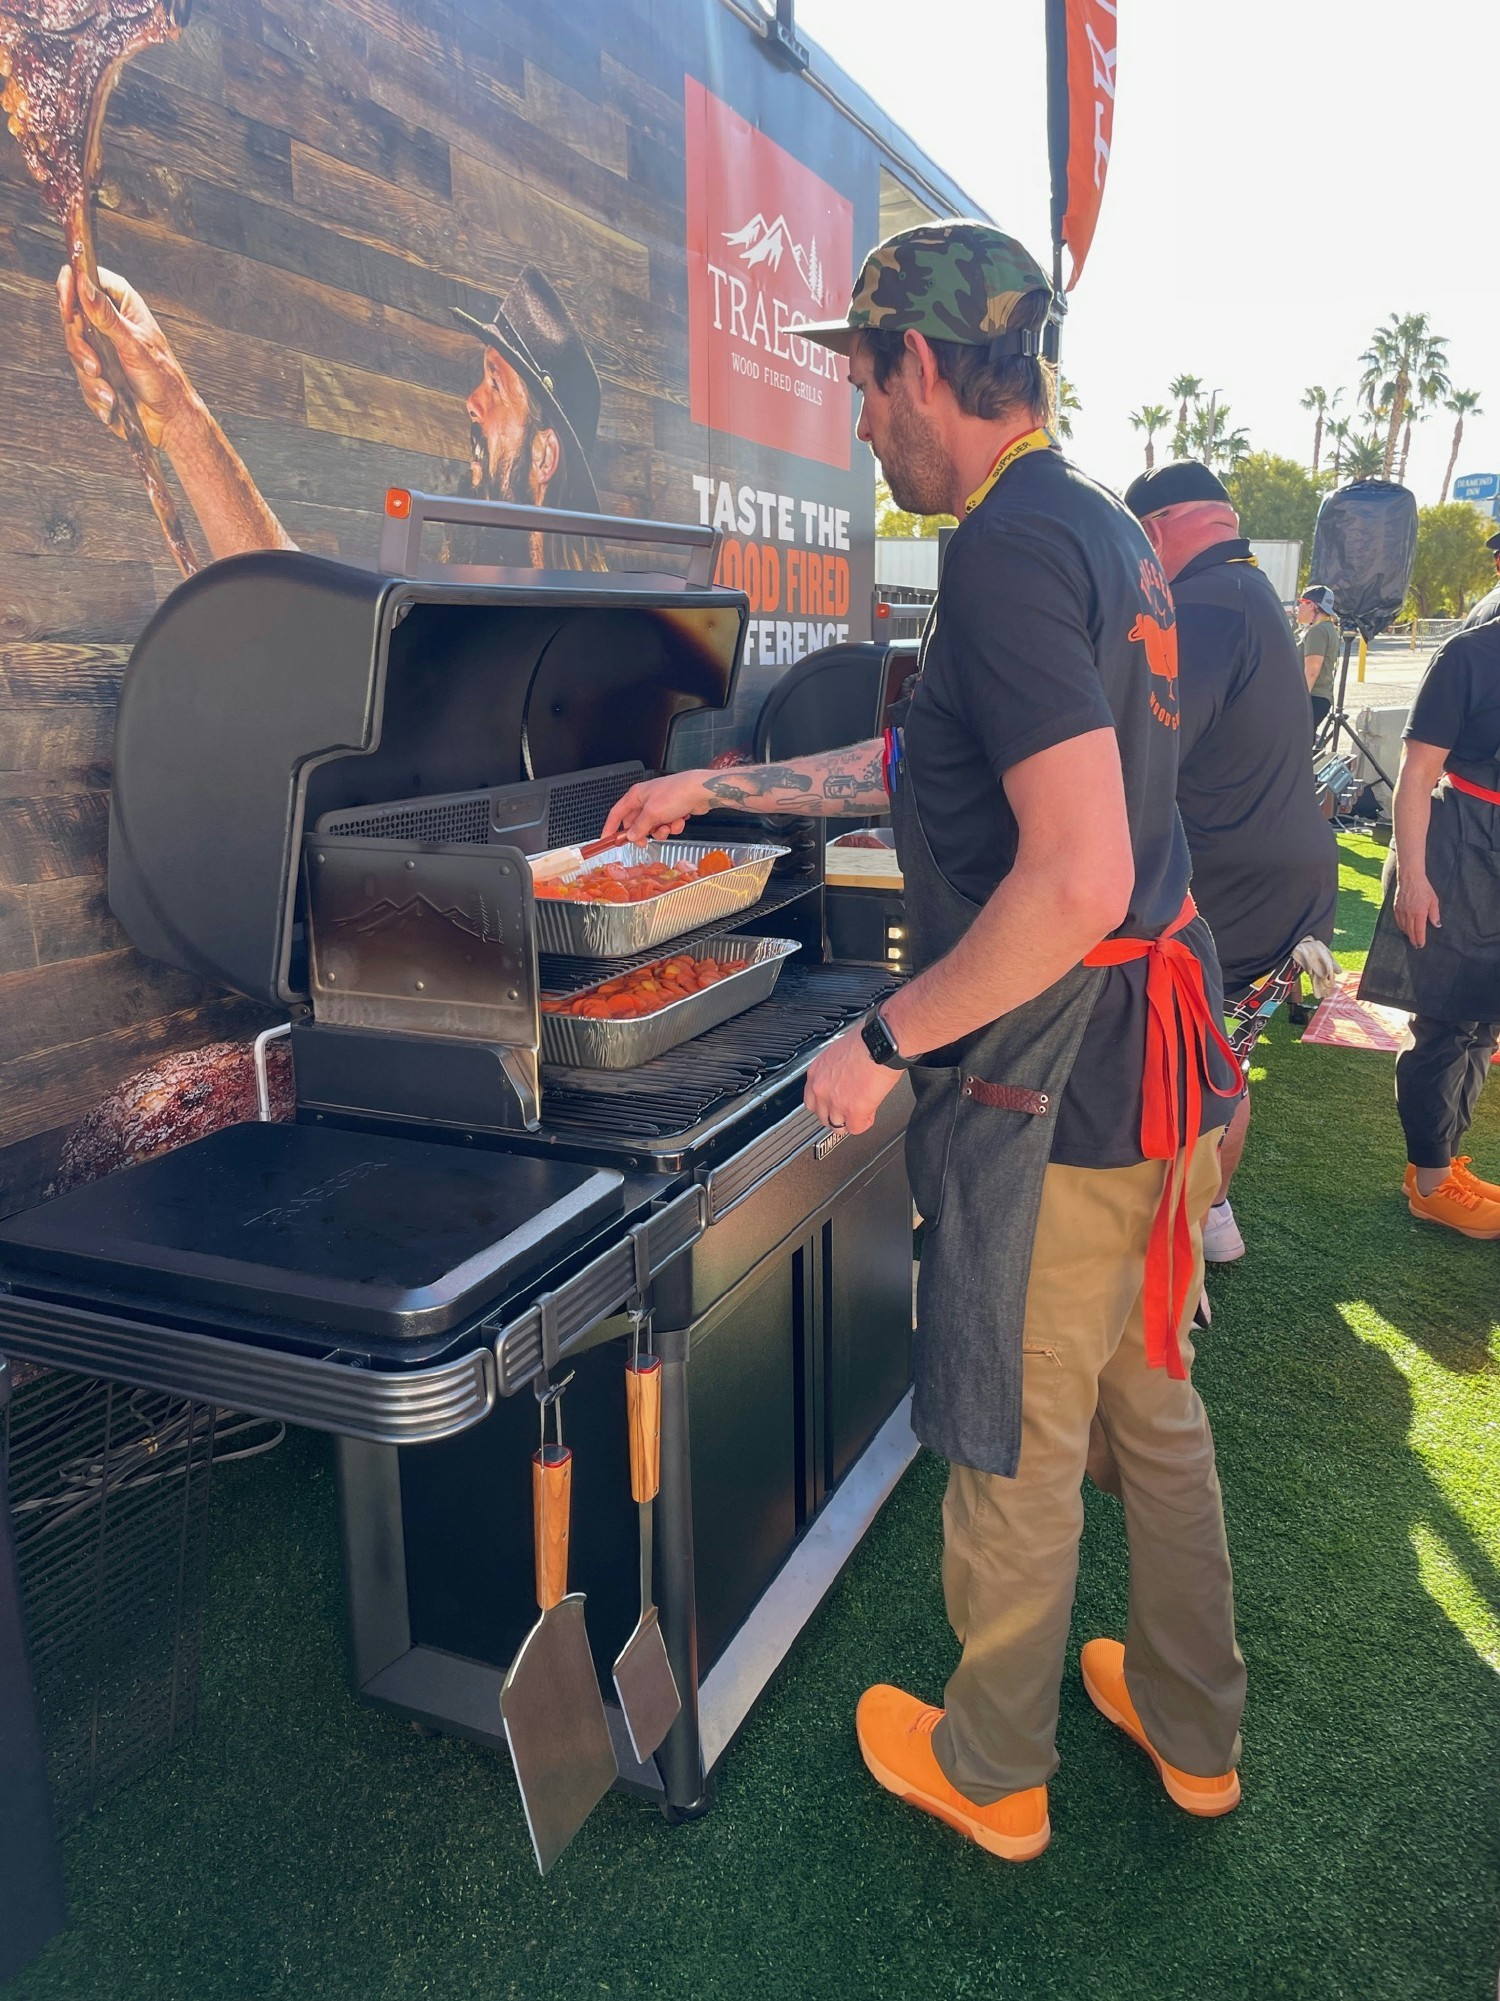 Grilling is a regular part of life in the Traegerhood.